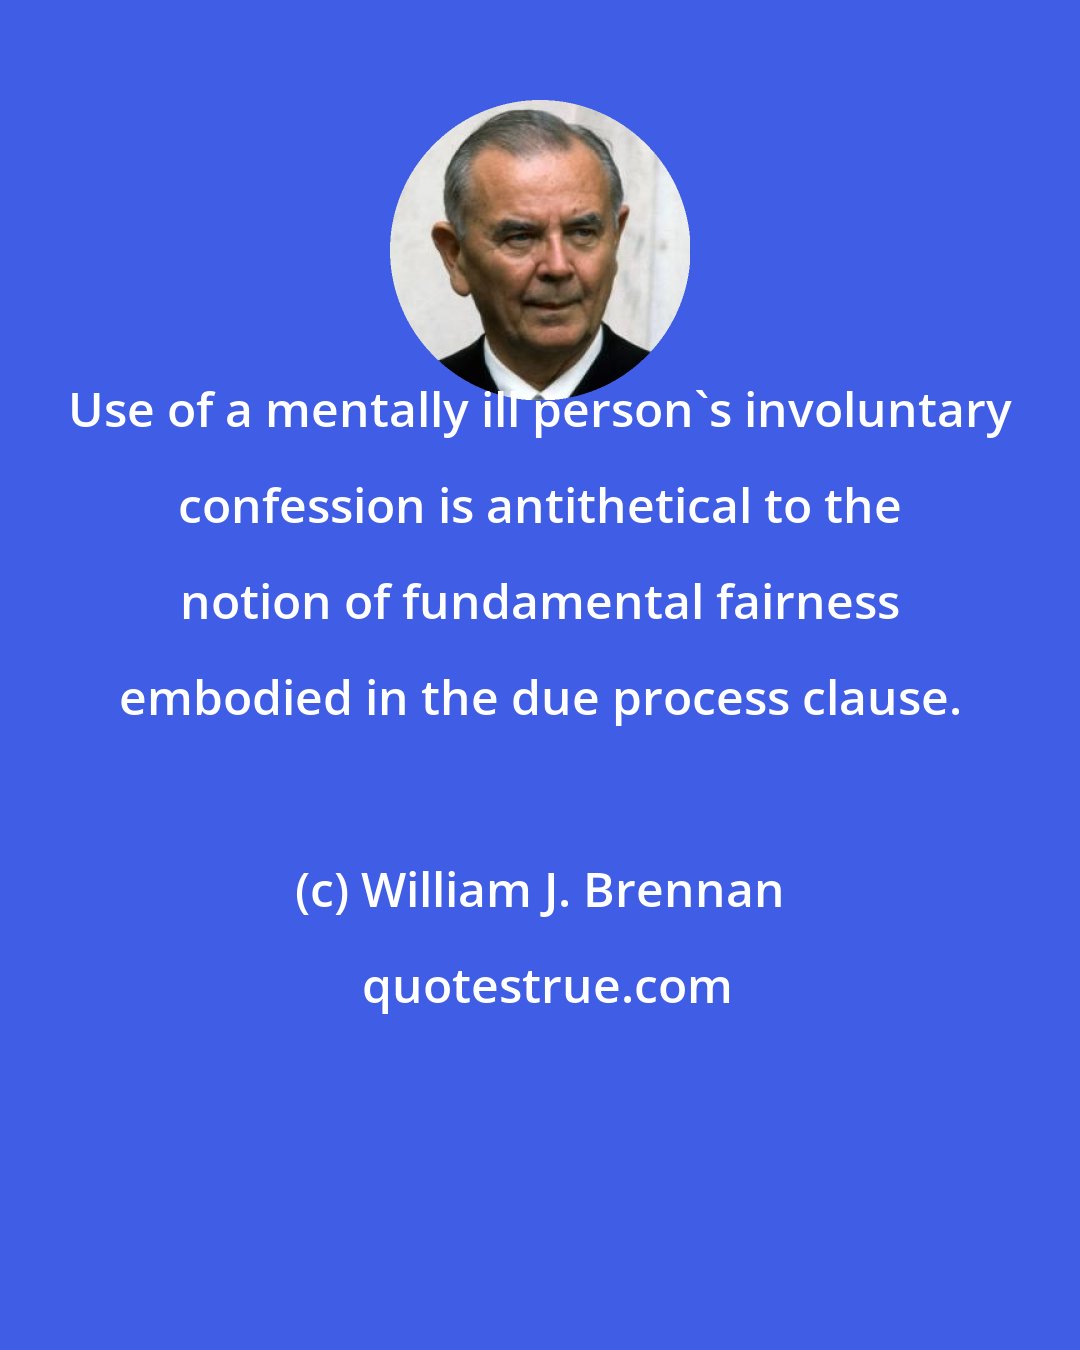 William J. Brennan: Use of a mentally ill person's involuntary confession is antithetical to the notion of fundamental fairness embodied in the due process clause.